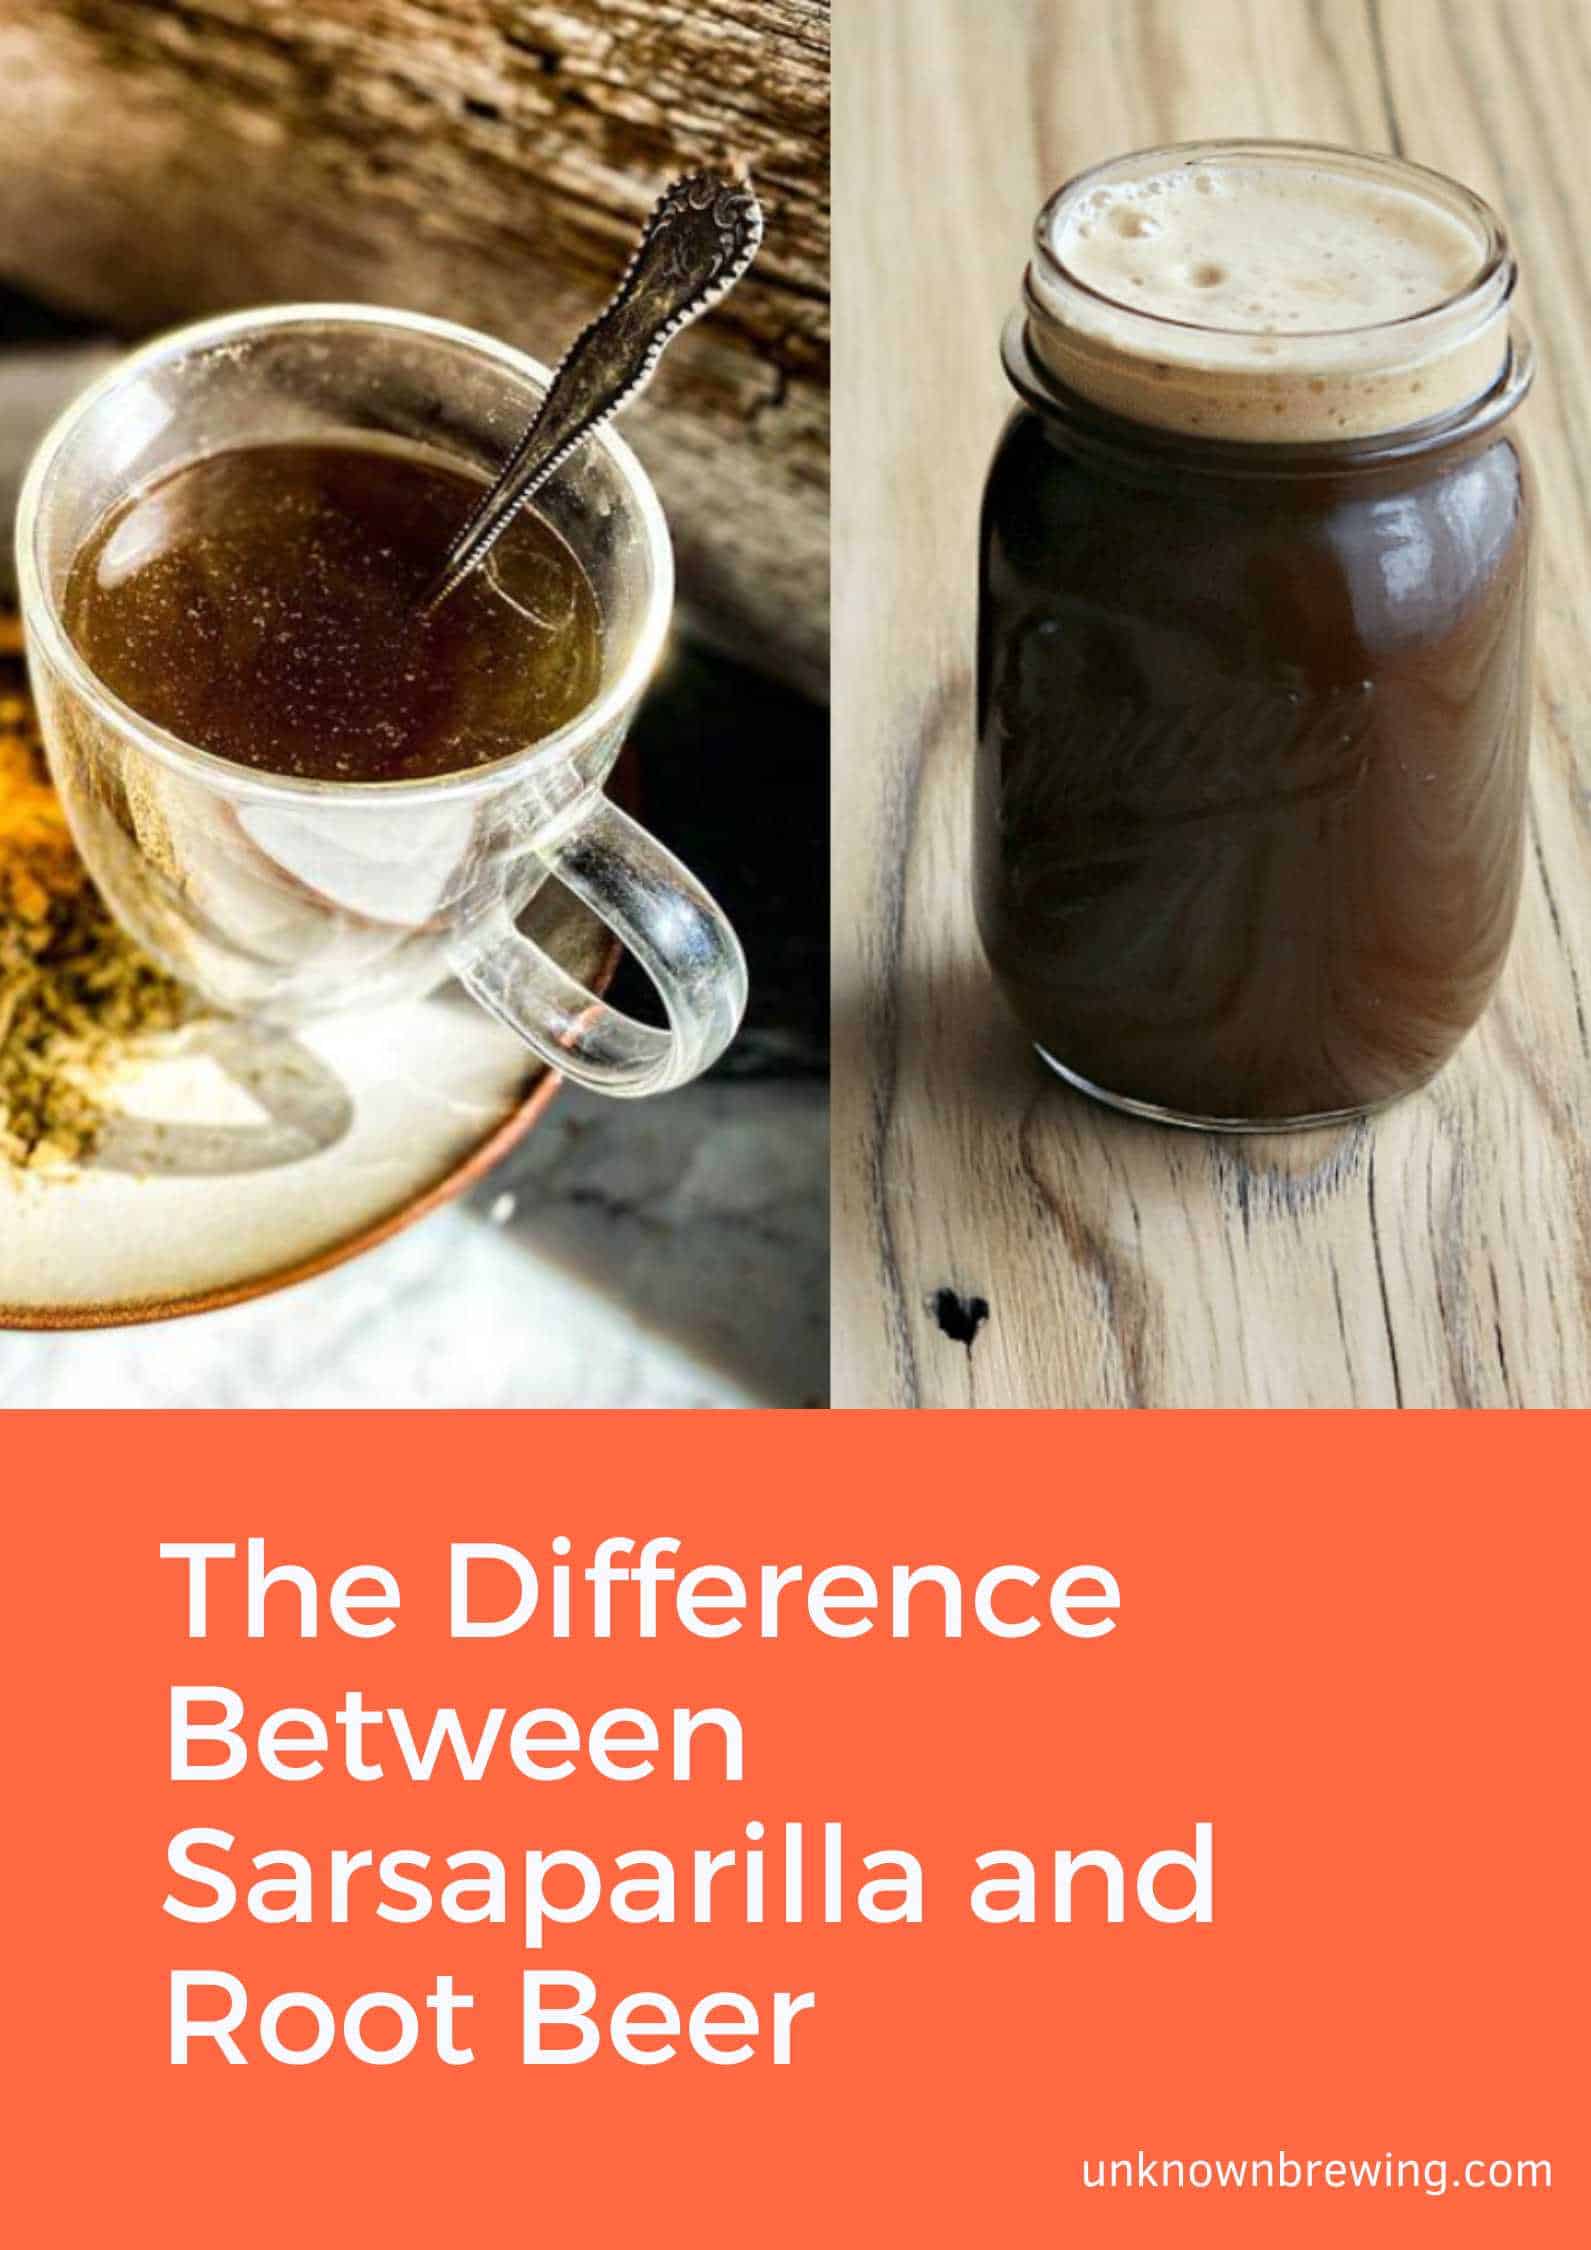 The Difference Between Sarsaparilla and Root Beer